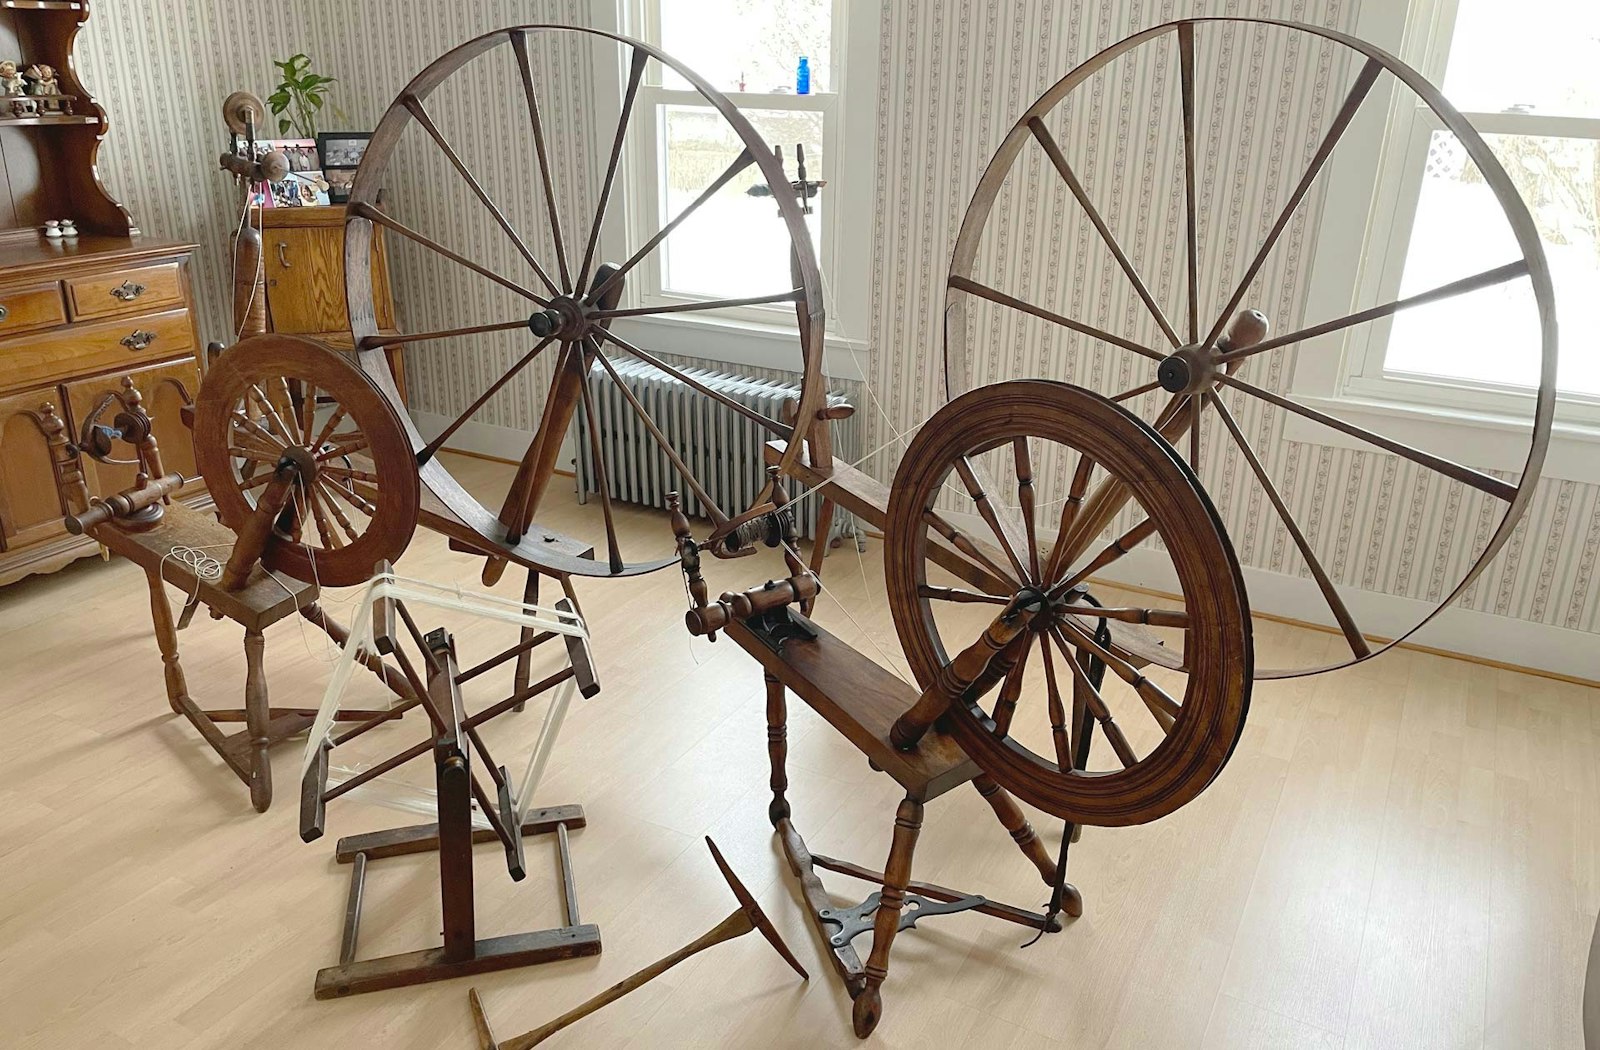 Yes, Antique Spinning Wheels Do Talk